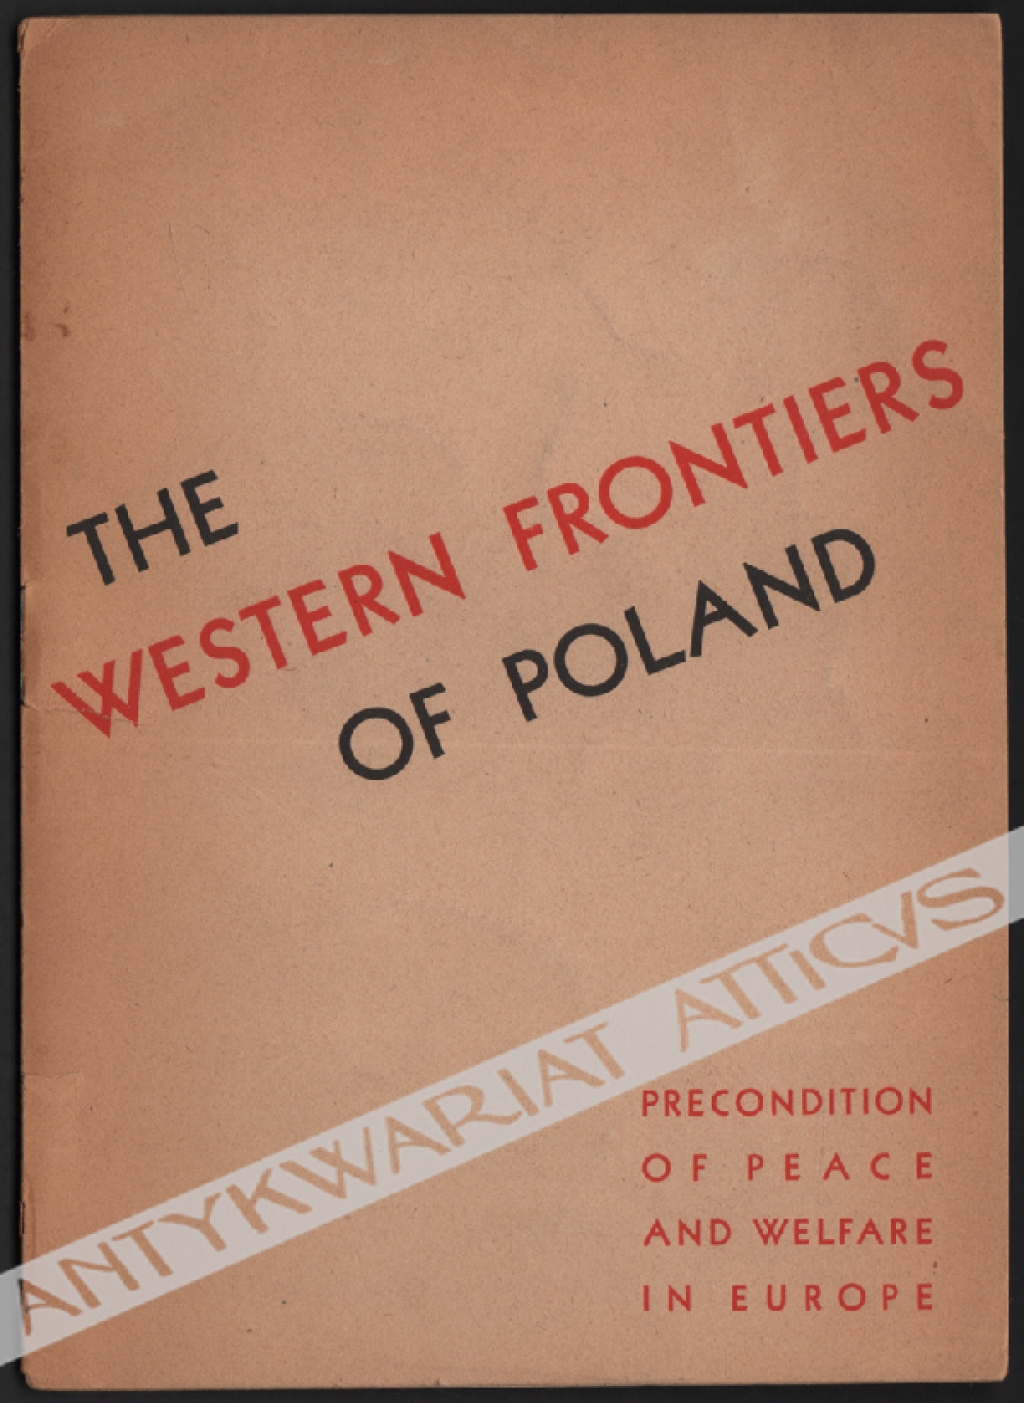 The western frontiers of Poland - precondition of peace and welfare in Europe